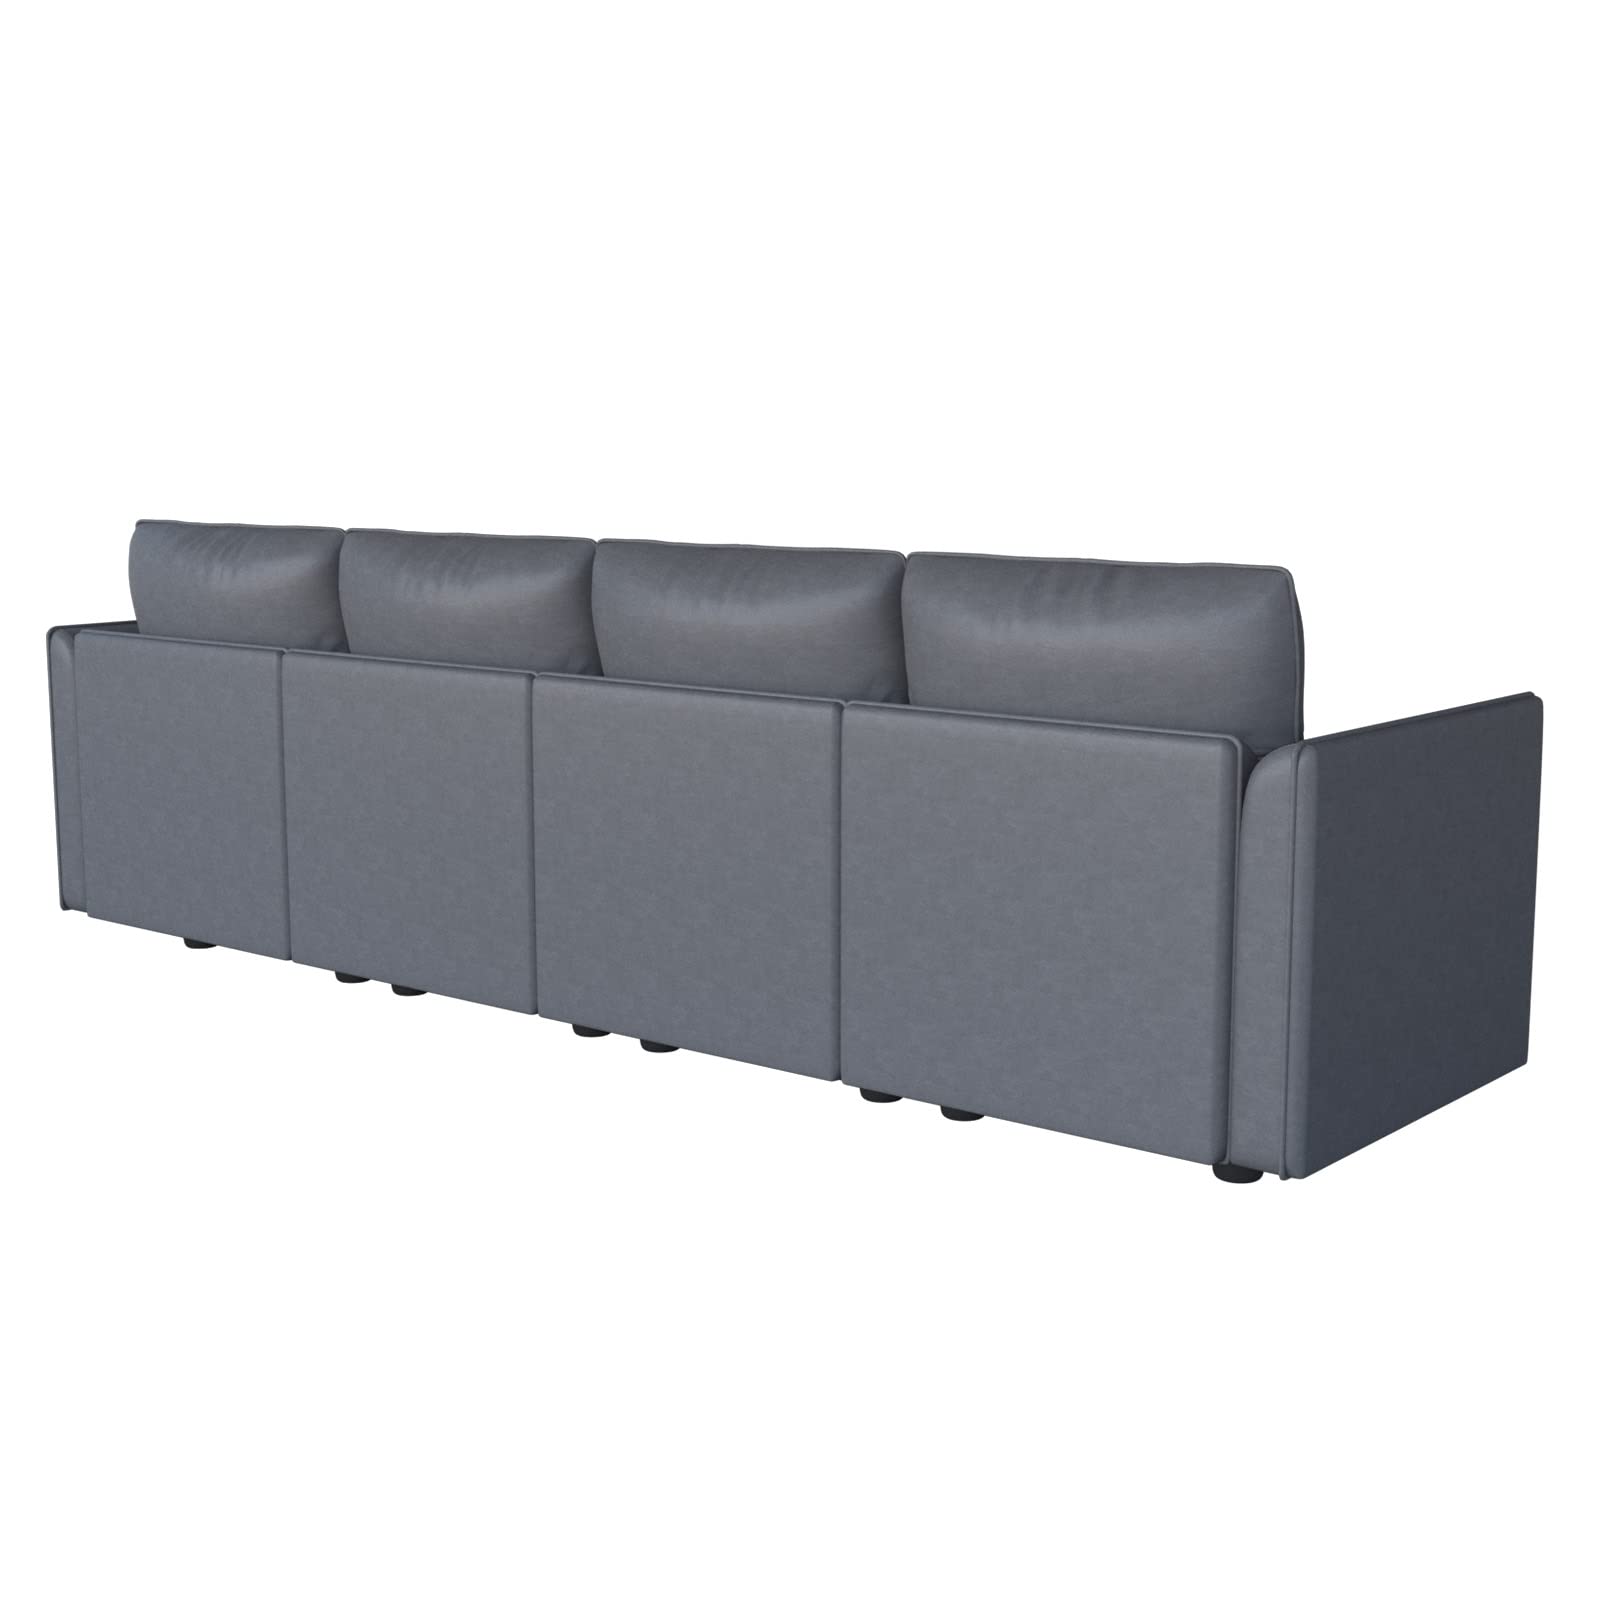 LLappuil Modular Sofa Faux Leather Fabric 102" Sectional Couch 4 Seater with Storage Seat, Modern Sectional Sofa for Living Room, Office, Dark Grey